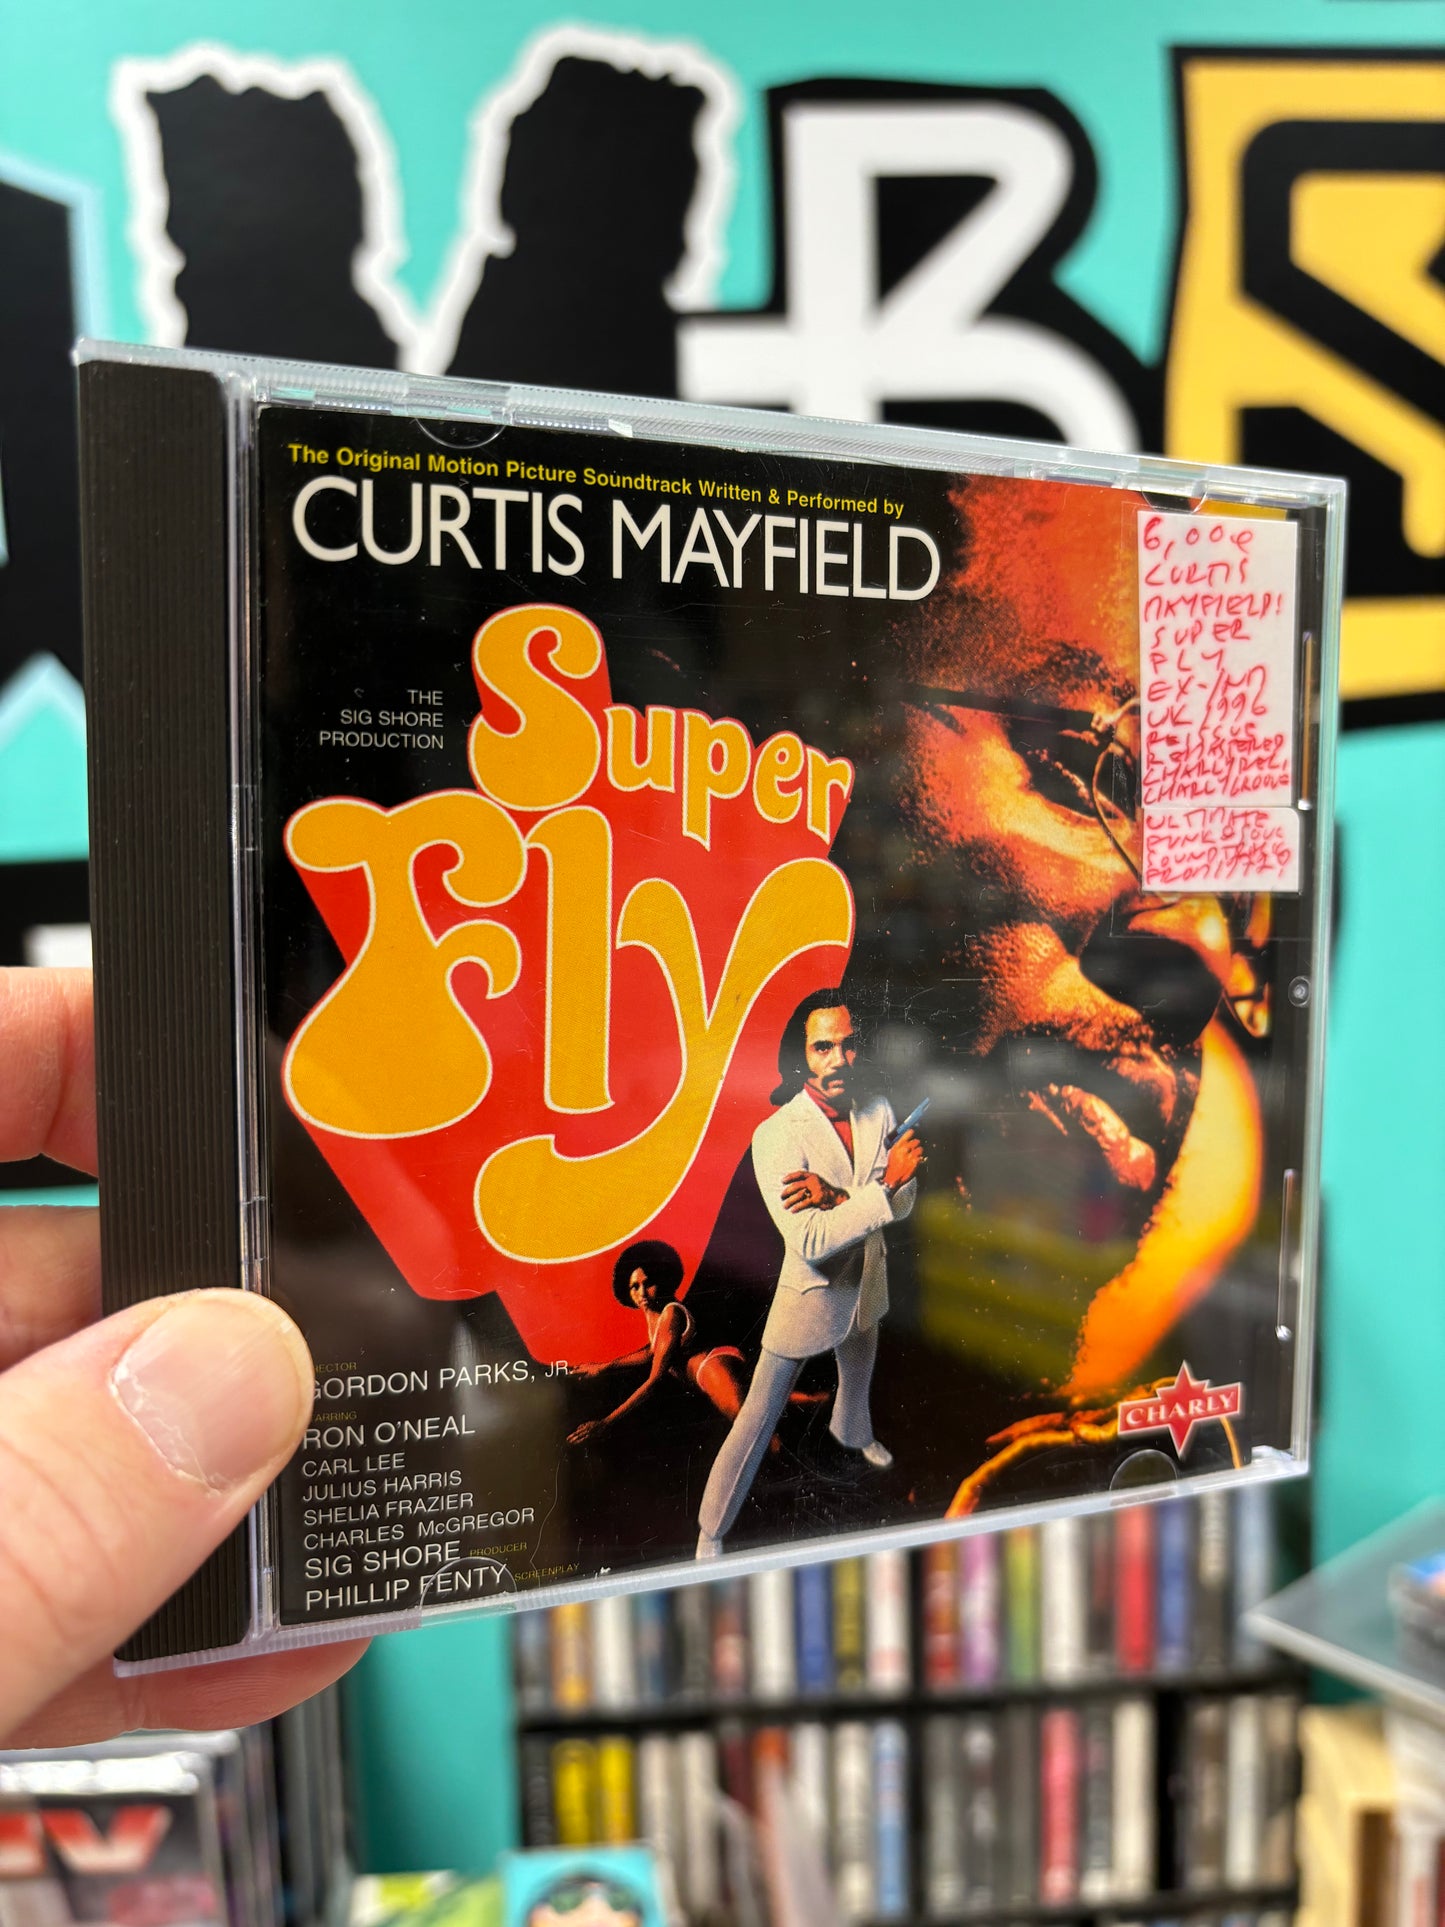 Curtis Mayfield: Super Fly, CD, reissue, remastered, UK 1996